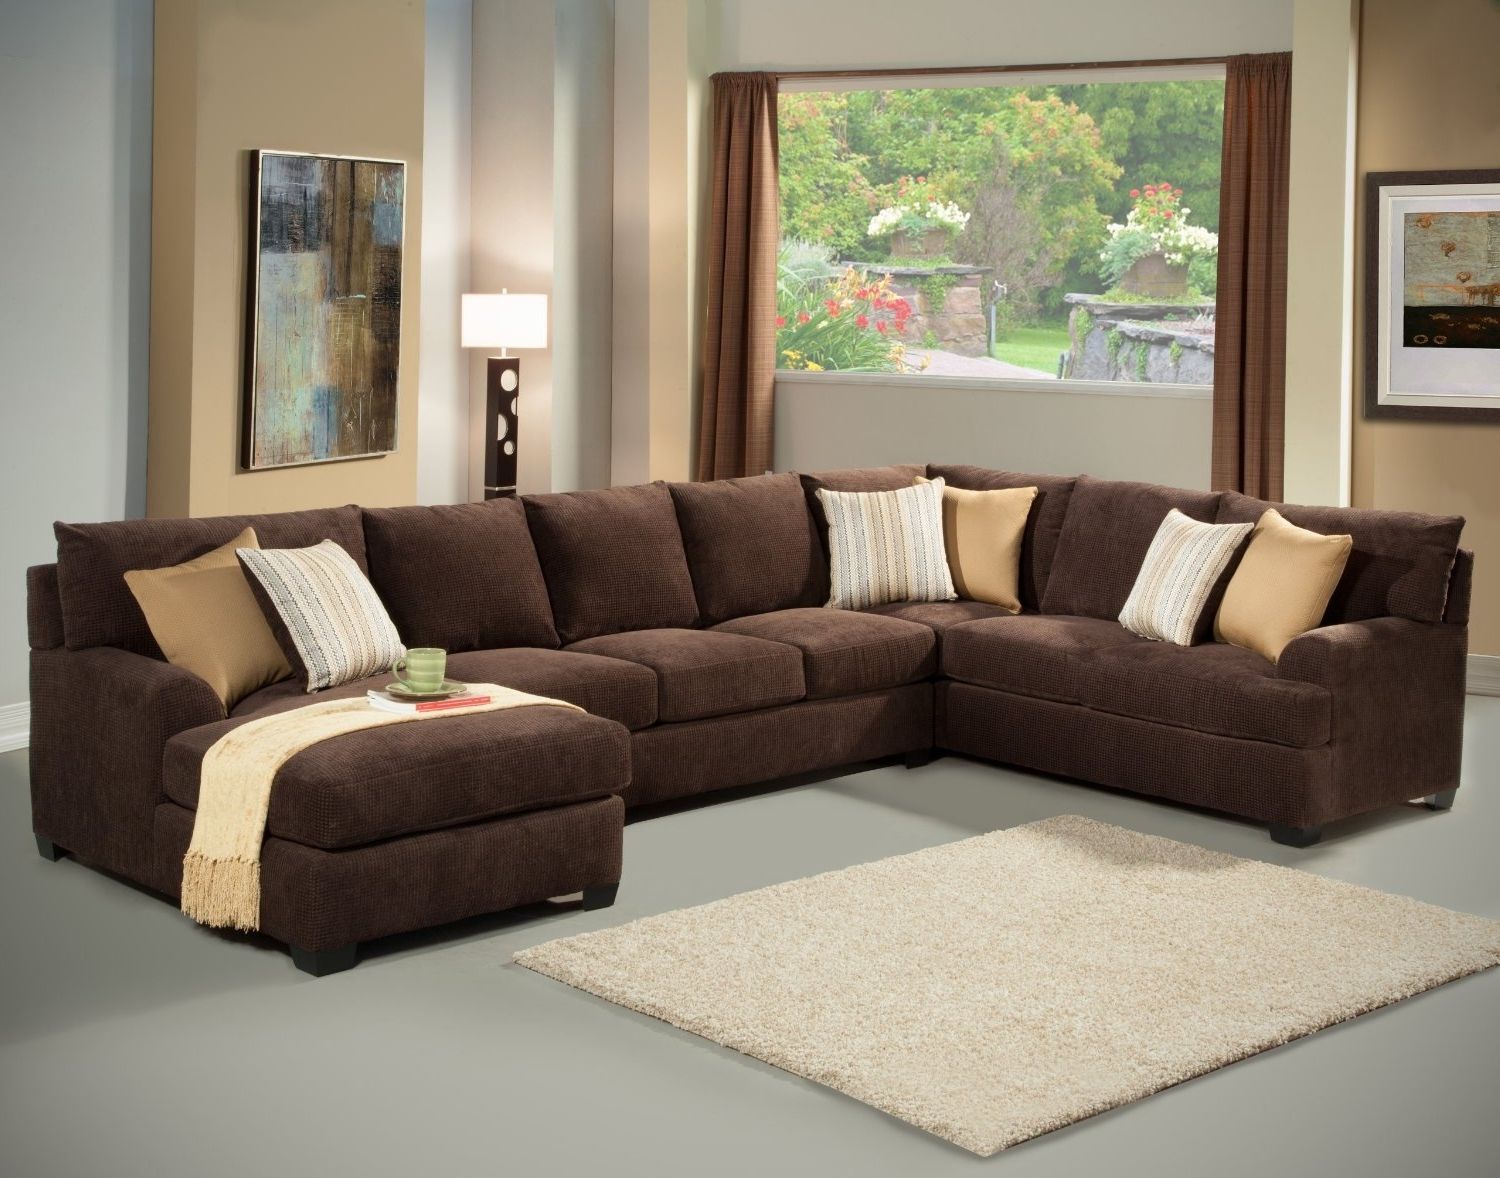 Preferred Sectional Sofas In San Antonio In Sofa : Ashley Furniture San Antonio Tx Best Sectional Sofa Beds (View 5 of 20)